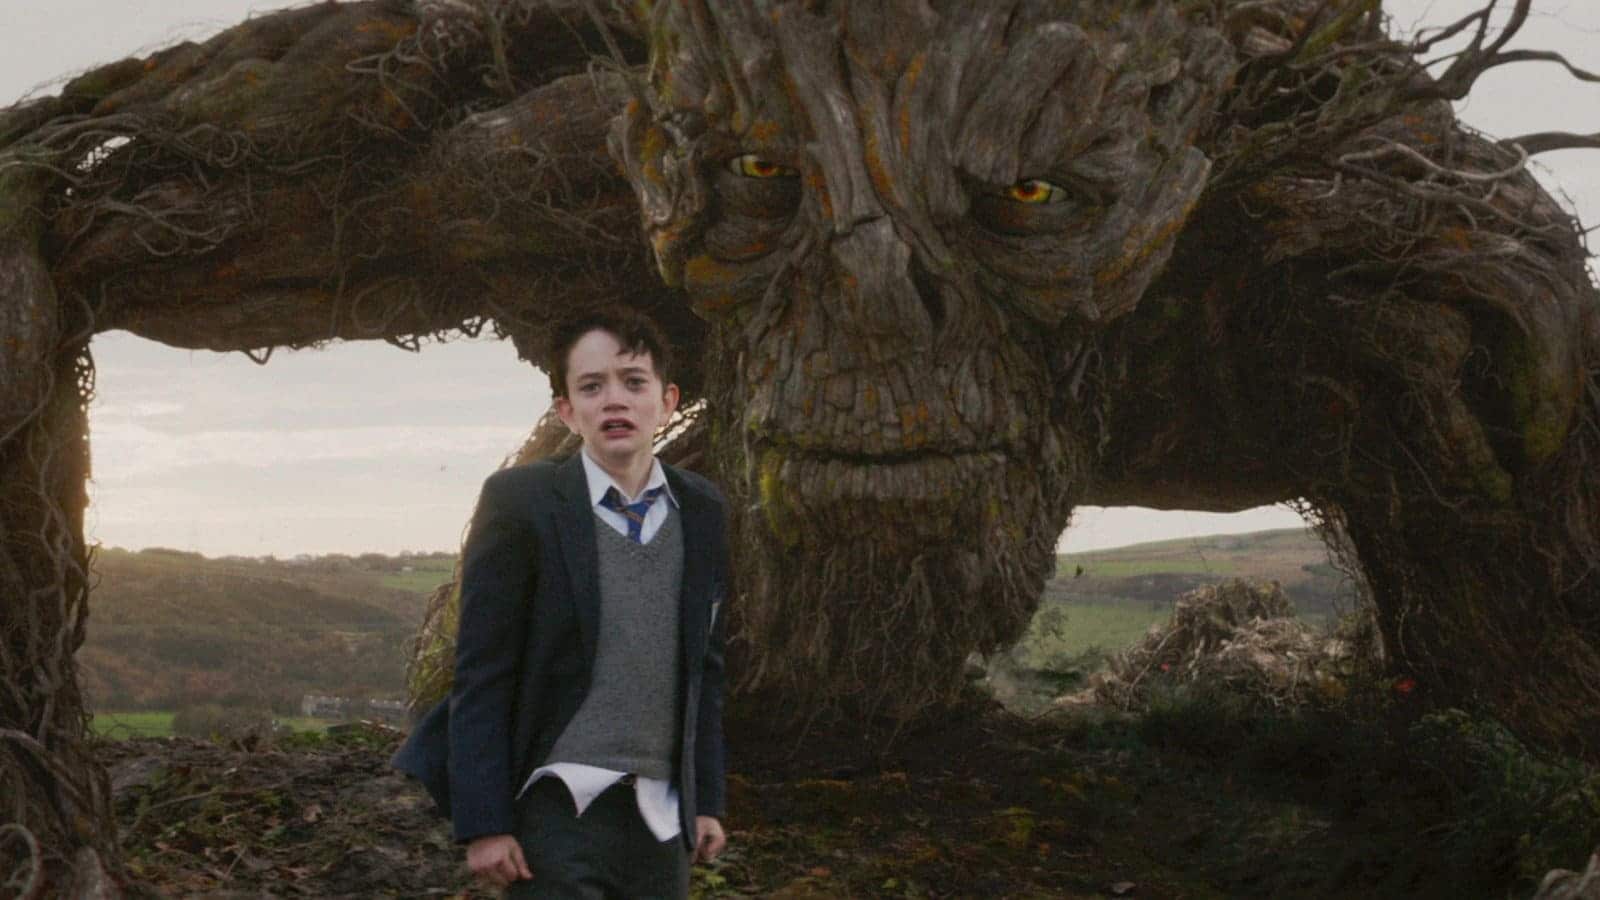 scene from A Monster Calls